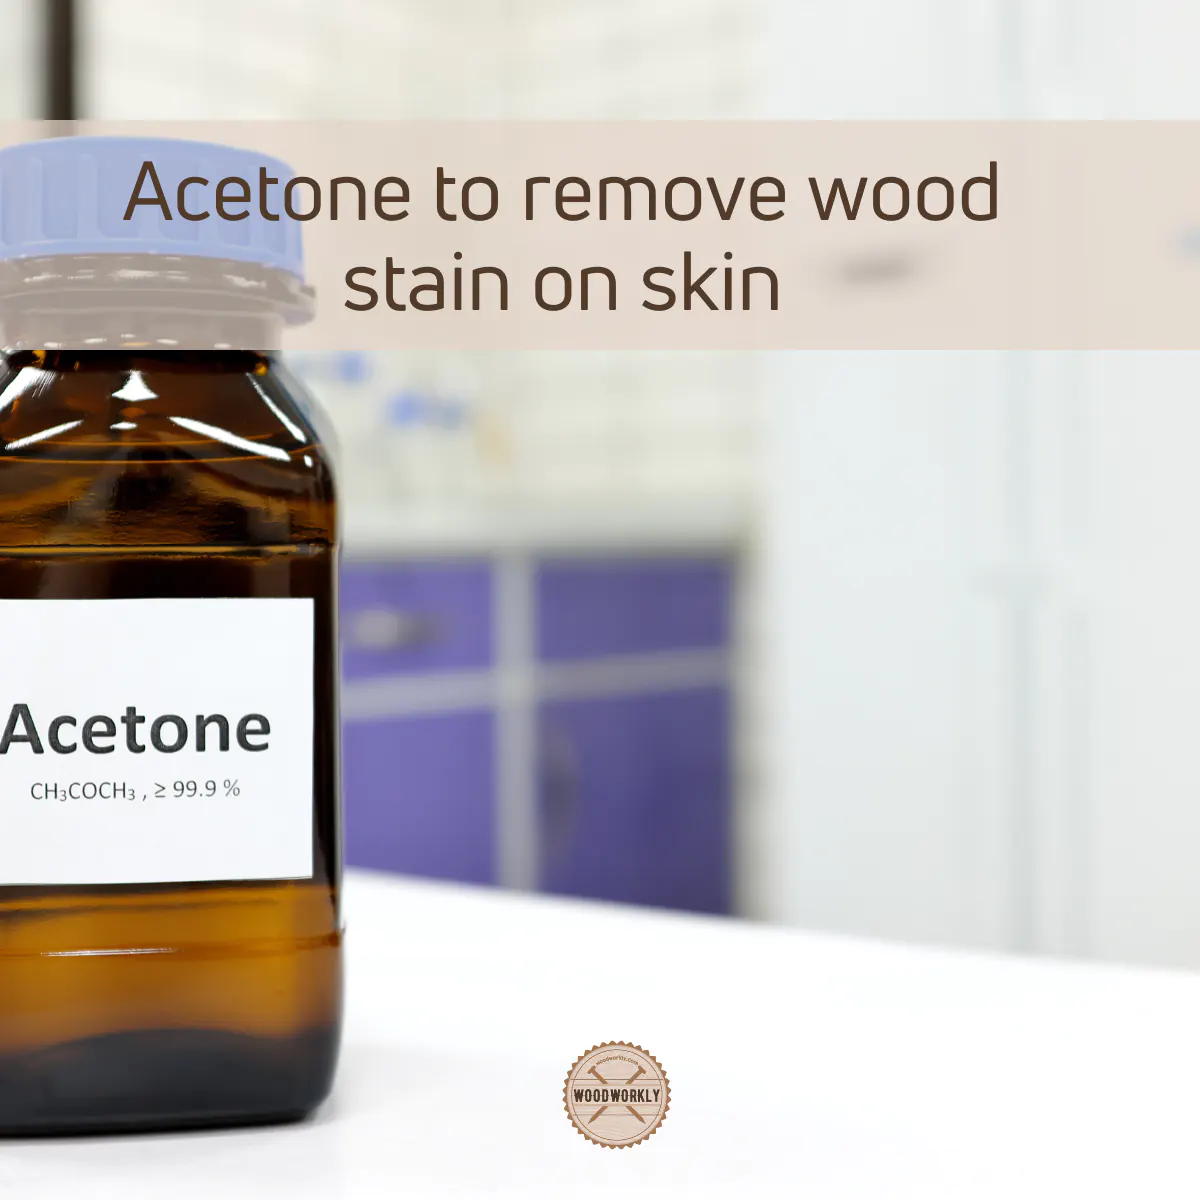 Acetone to remove wood stain on skin